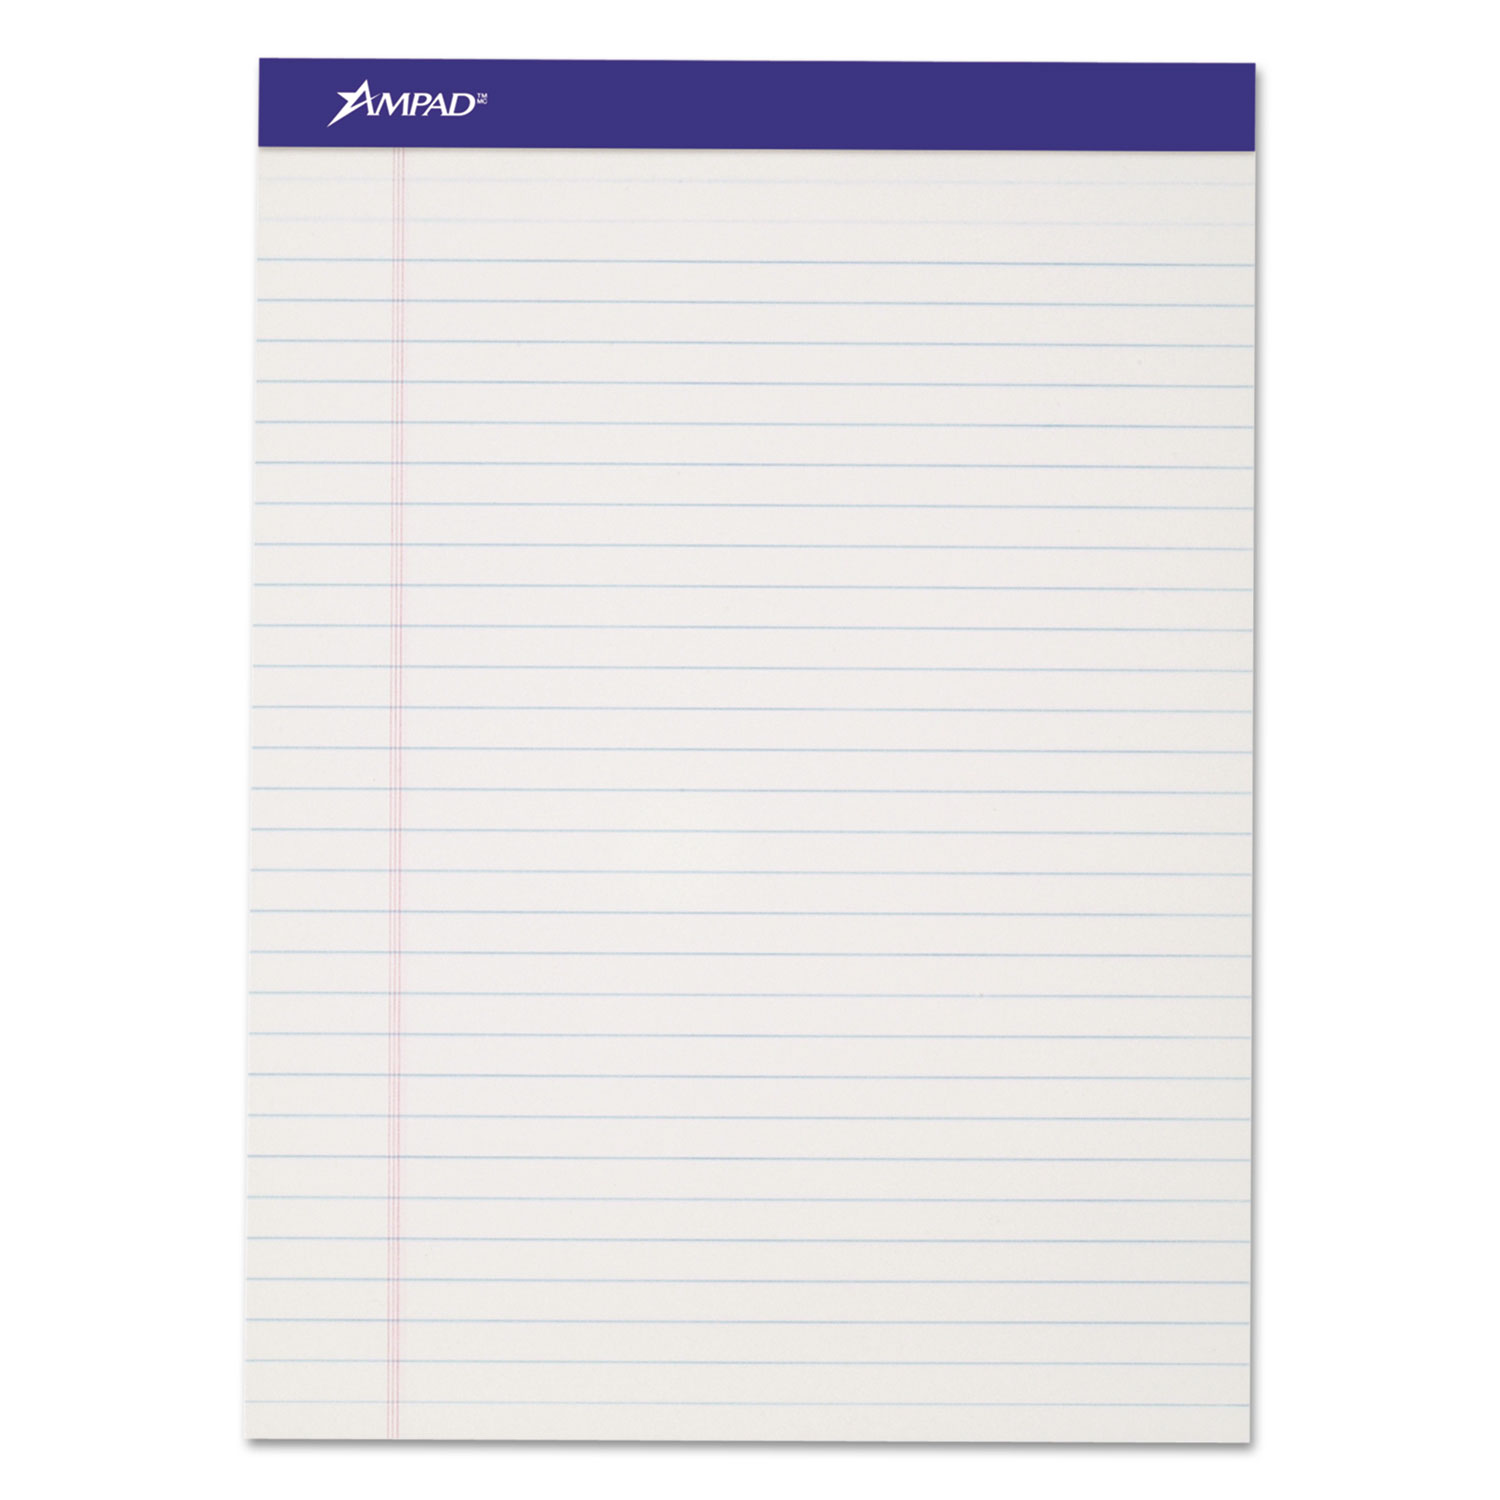  Ampad 20-320 Perforated Writing Pads, Wide/Legal Rule, 8.5 x 11.75, White, 50 Sheets, Dozen (TOP20320) 